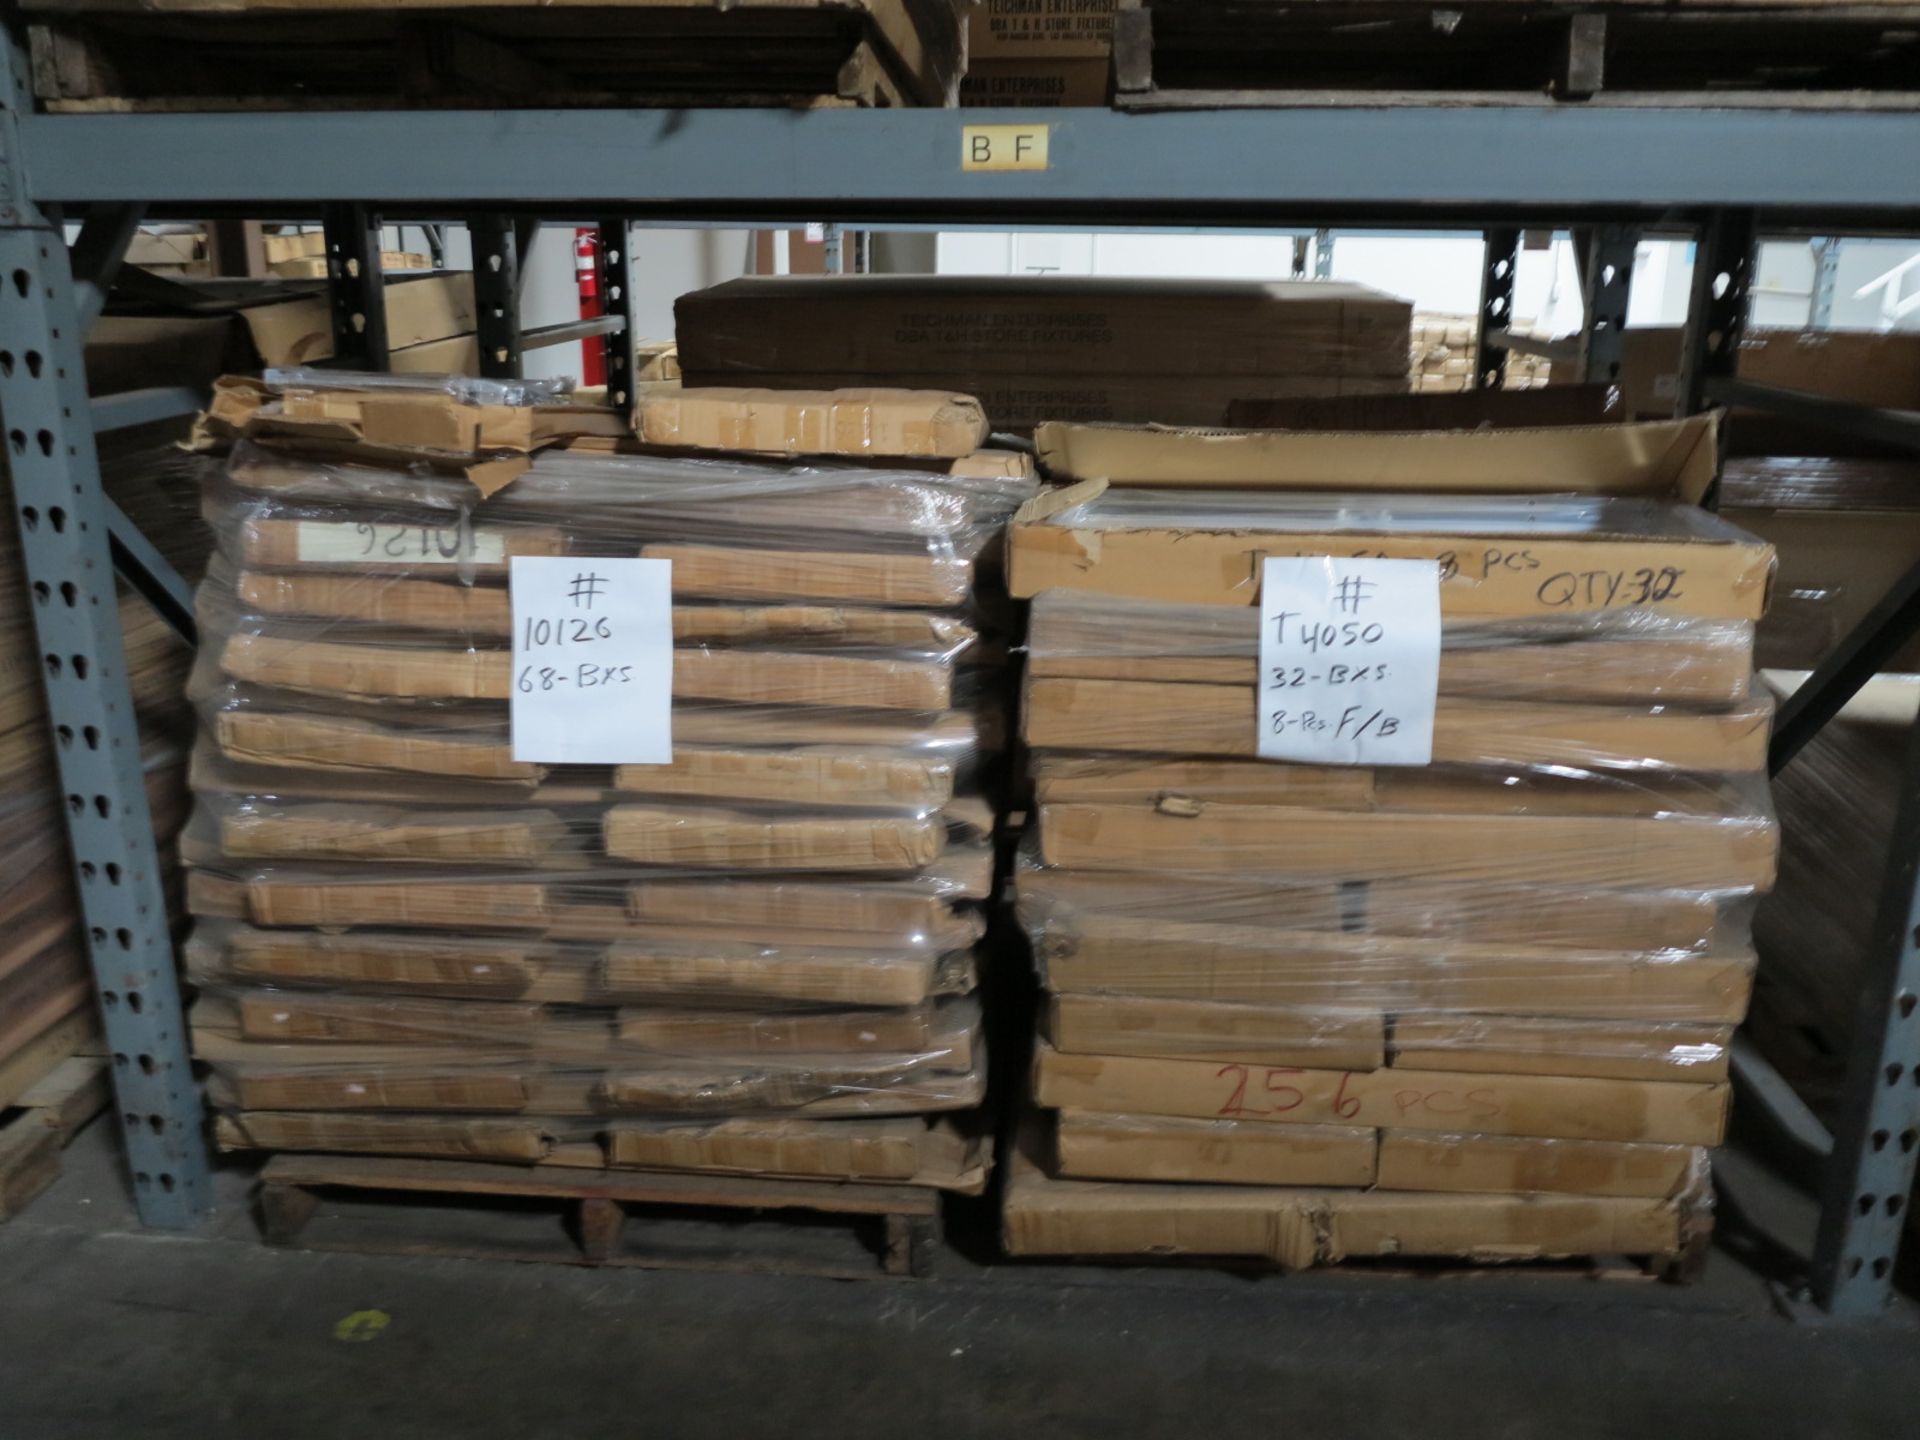 LOT - CONTENTS OF (3) SECTIONS OF PALLET RACK TO INCLUDE: ITEM # 10126, 2 WAY W (2) 16" STR. ARMS, - Bild 9 aus 12